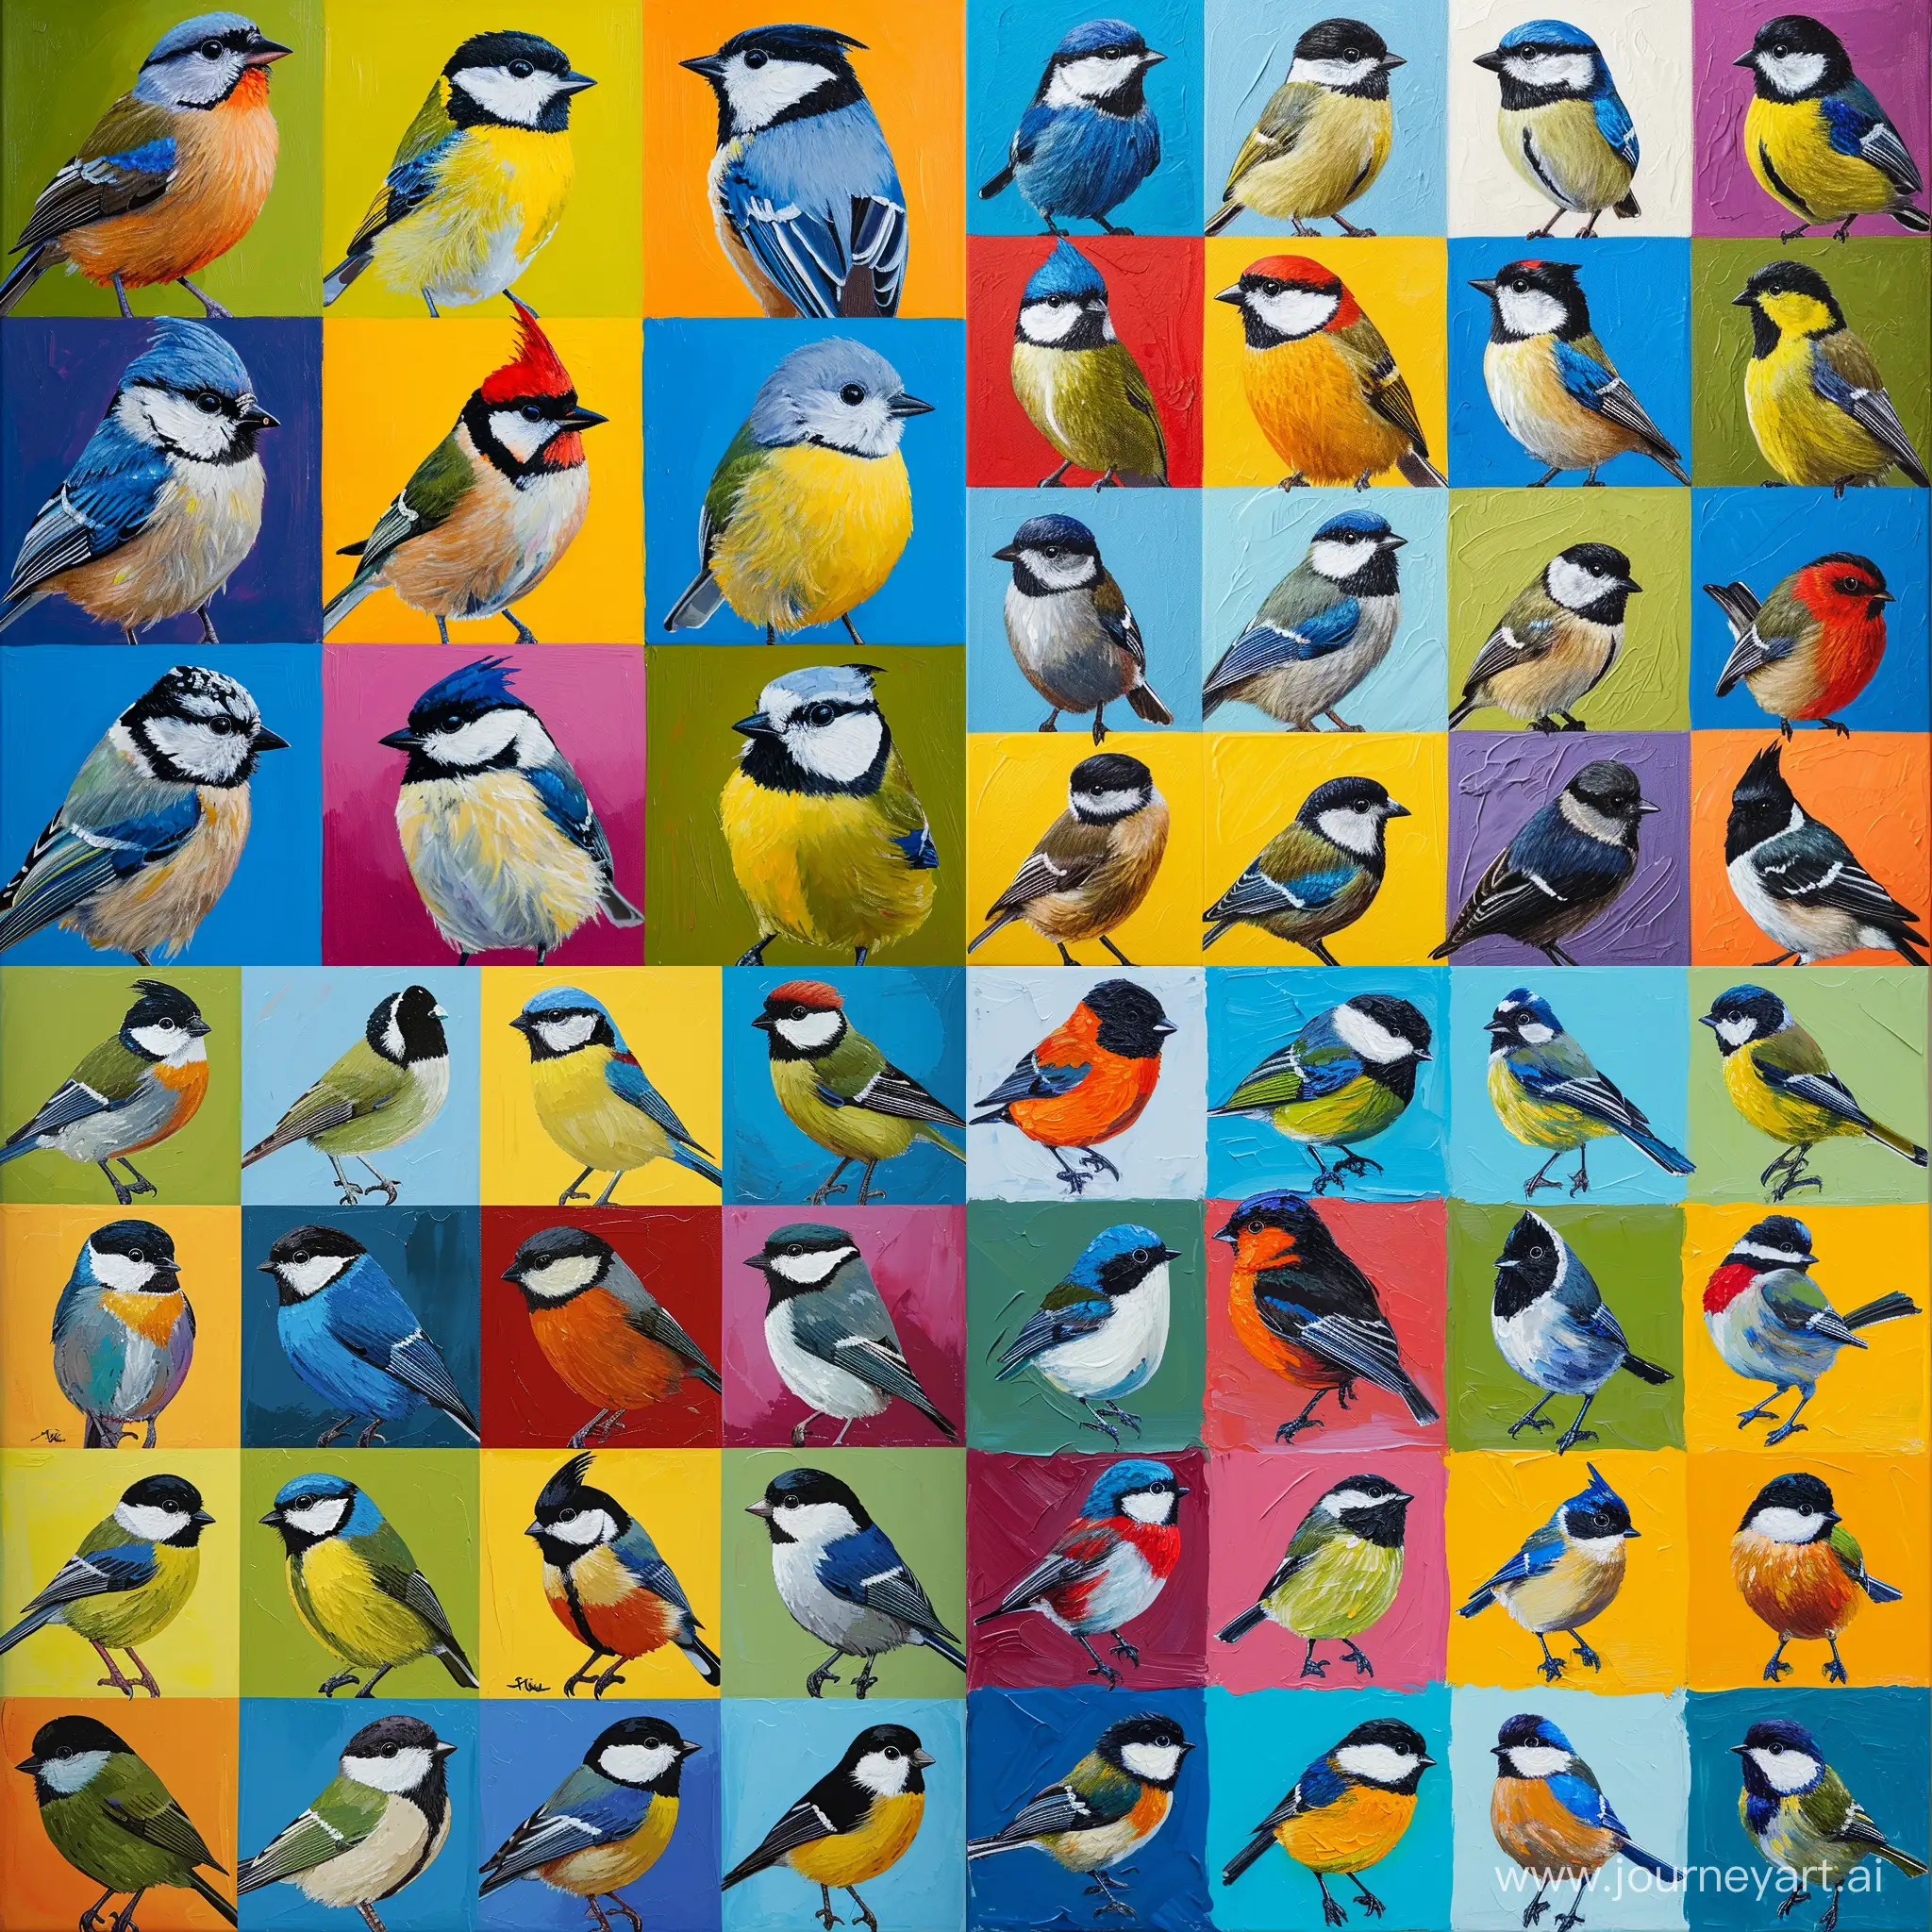 an interior painting in bright colors 20 varieties of tits birds are each depicted in a square with proportions of 4:4 in the form of an interior painting in bright colors.